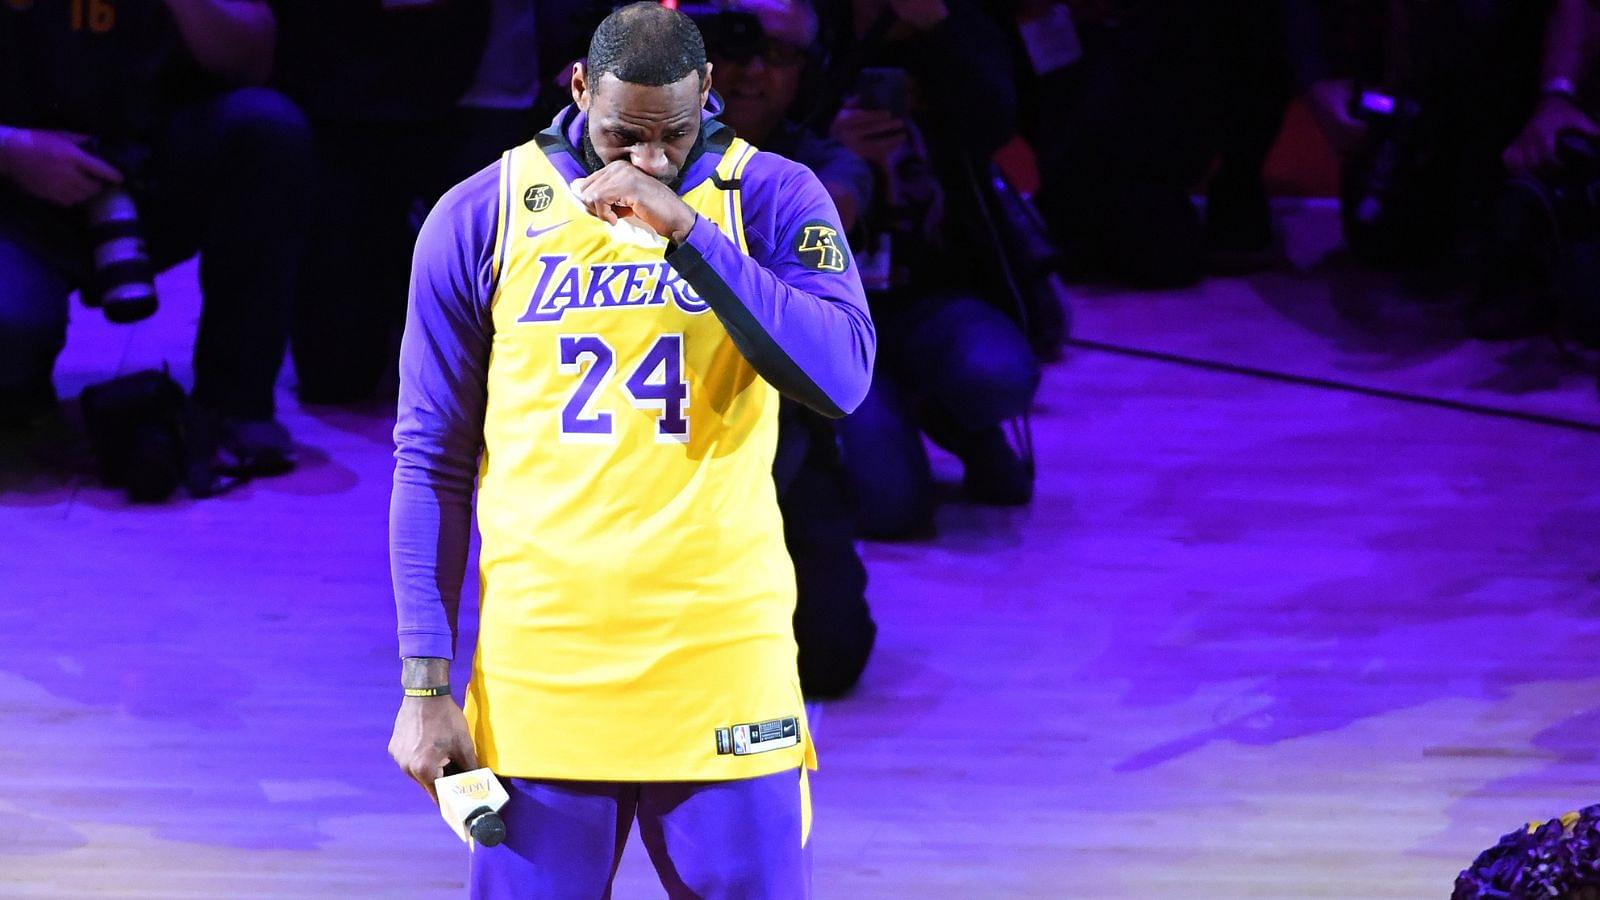 “No better sports role model than LeBron James!”: NBA Twitter brings up a complication of Lakers superstar’s humble personality